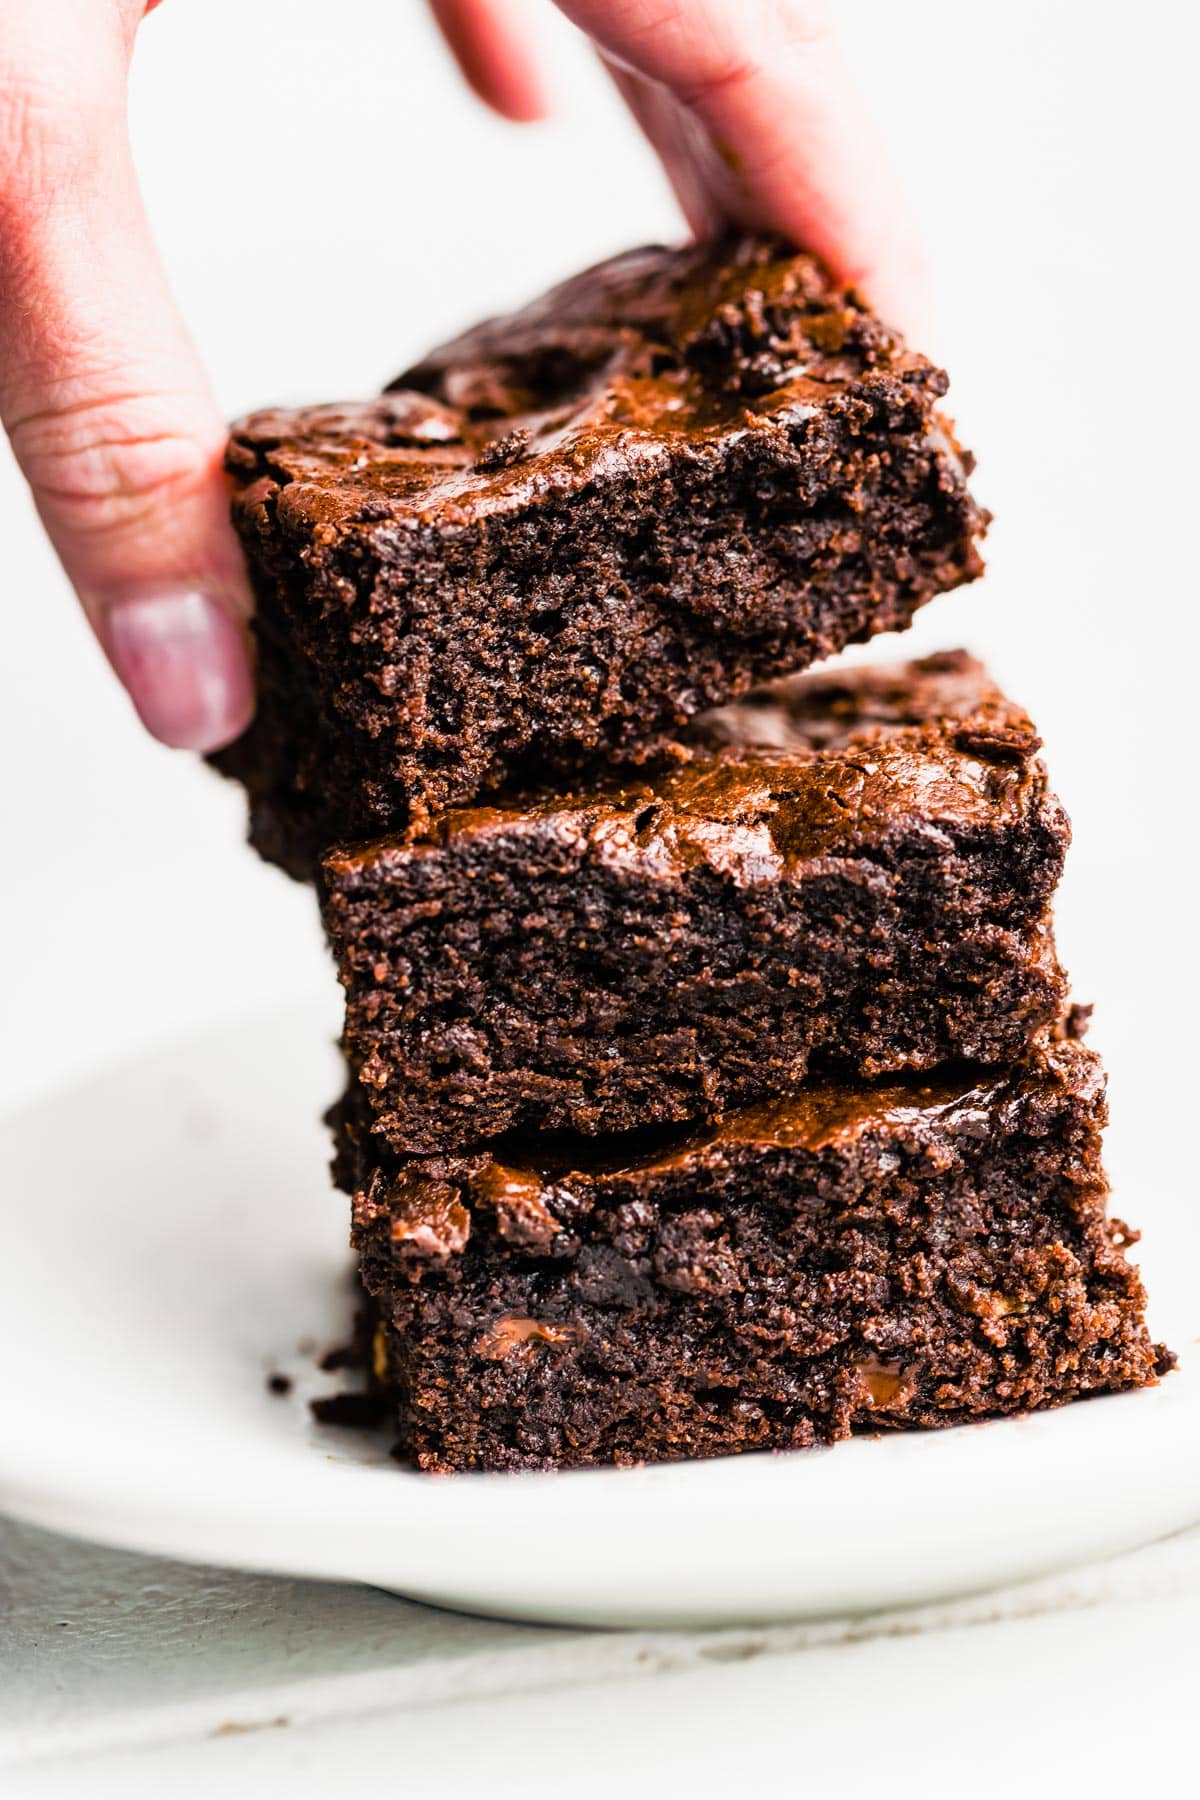 A hand grabbing a gluten free brownie from a stack of three brownies on top of each other on a plate.